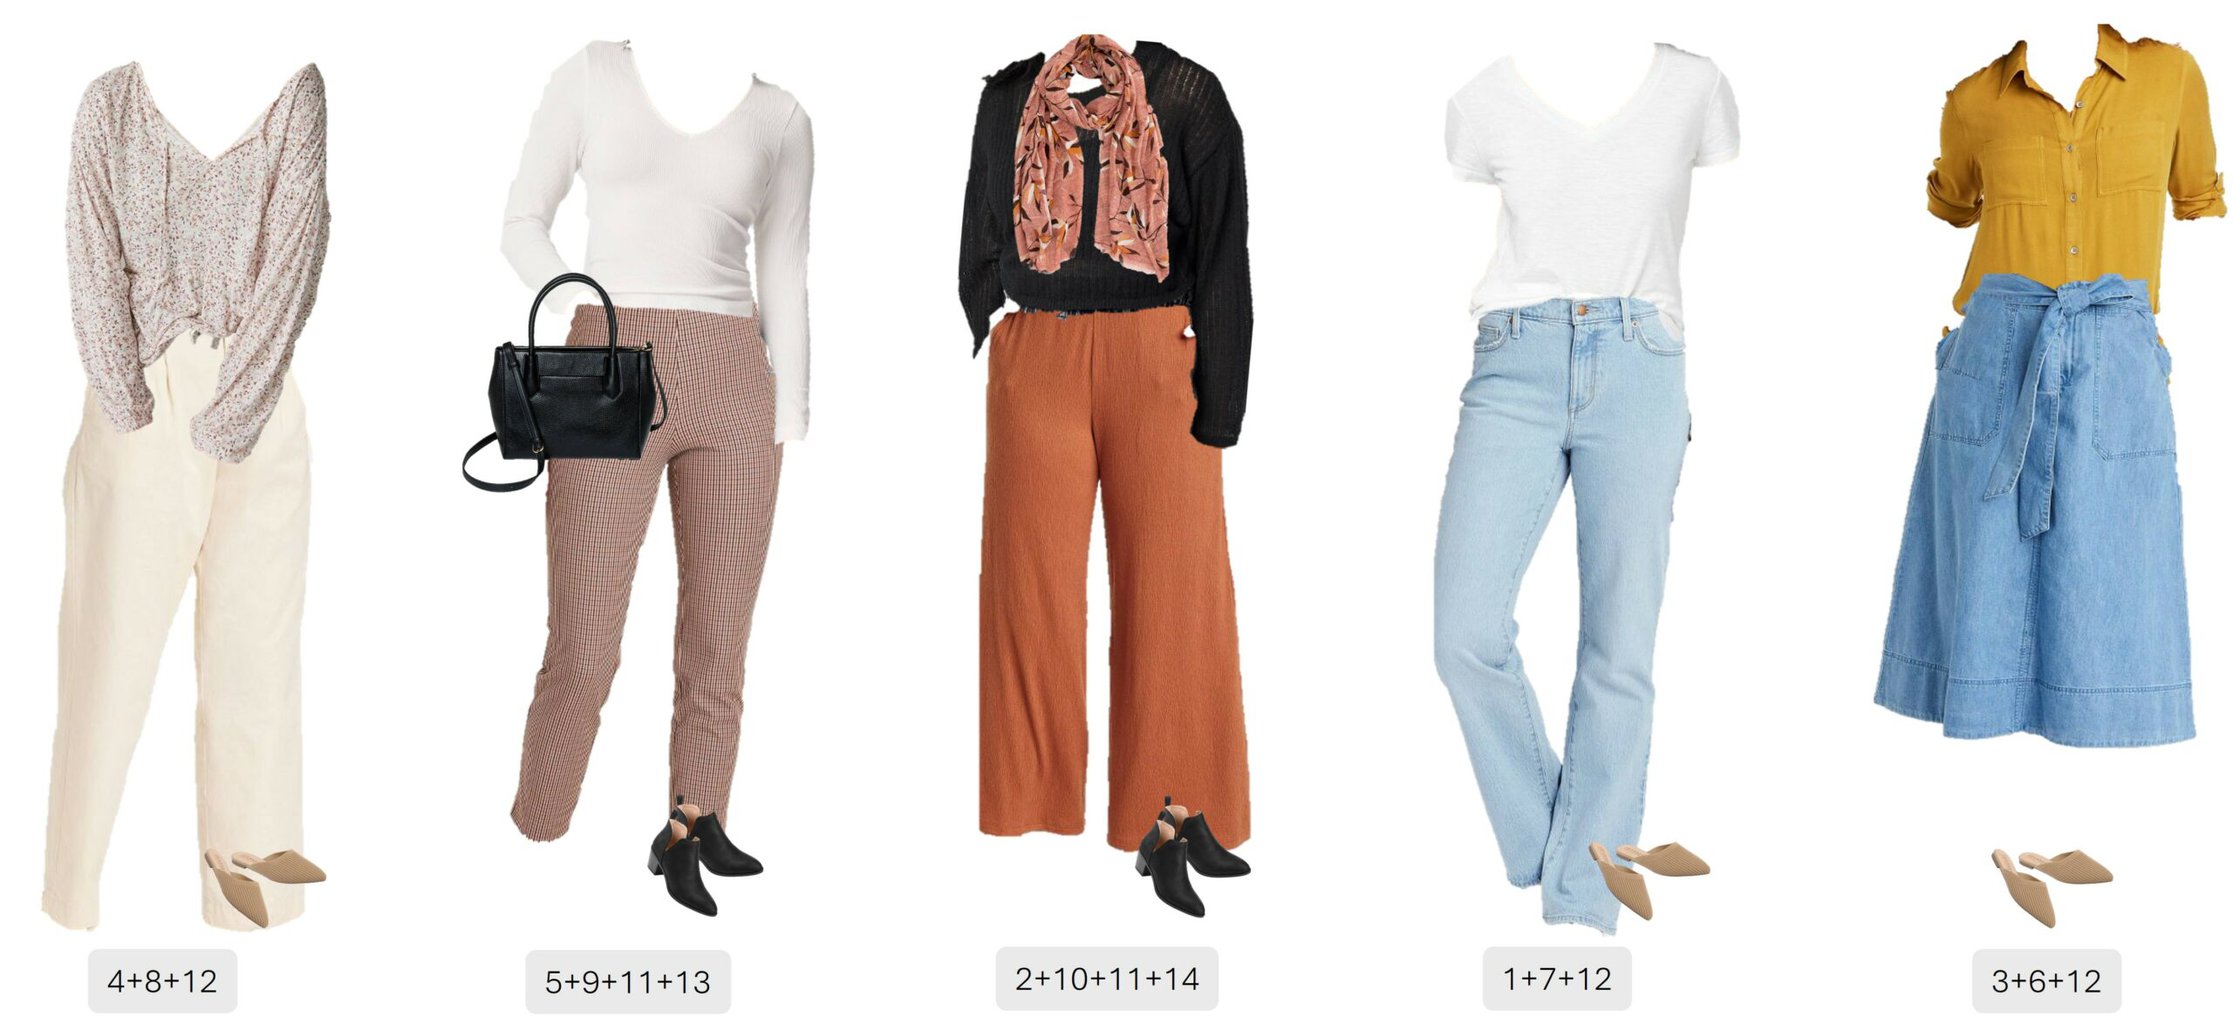 Target Summer Clothes – Summer Outfits Capsule Wardrobe - Everyday